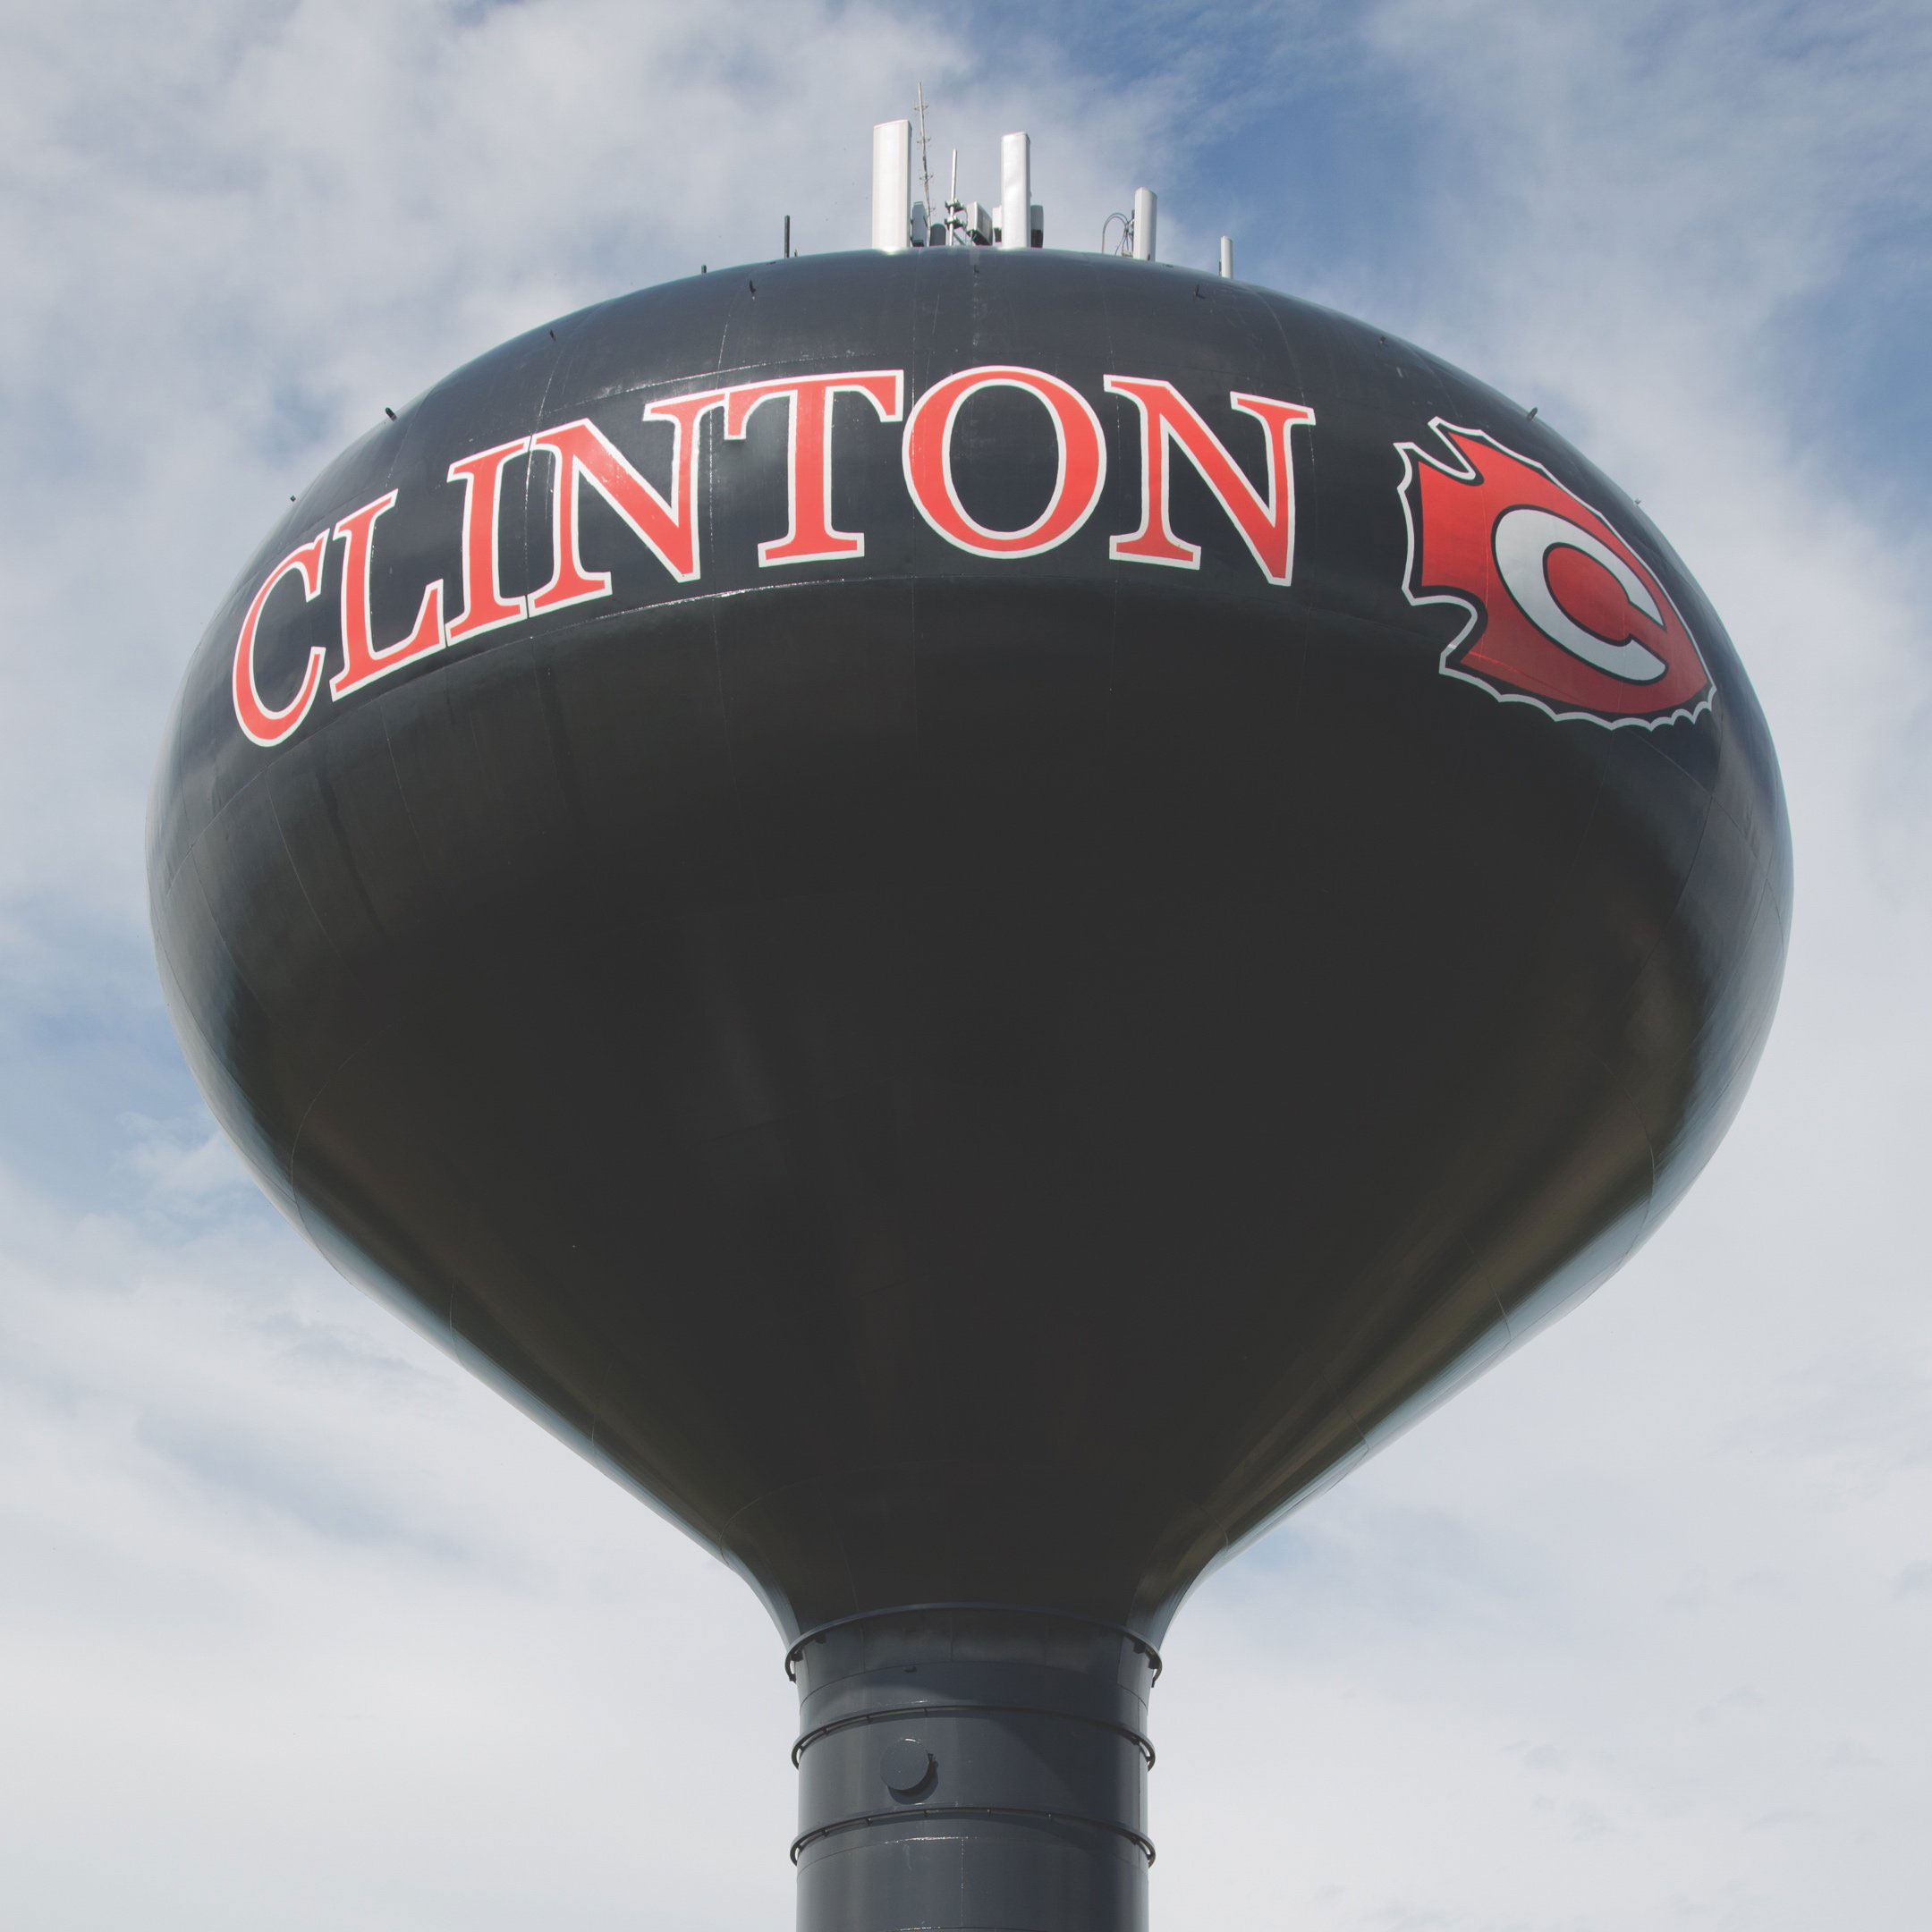 Clinton Mississippi, Water Tower, Tnemec Company, Hydroflon